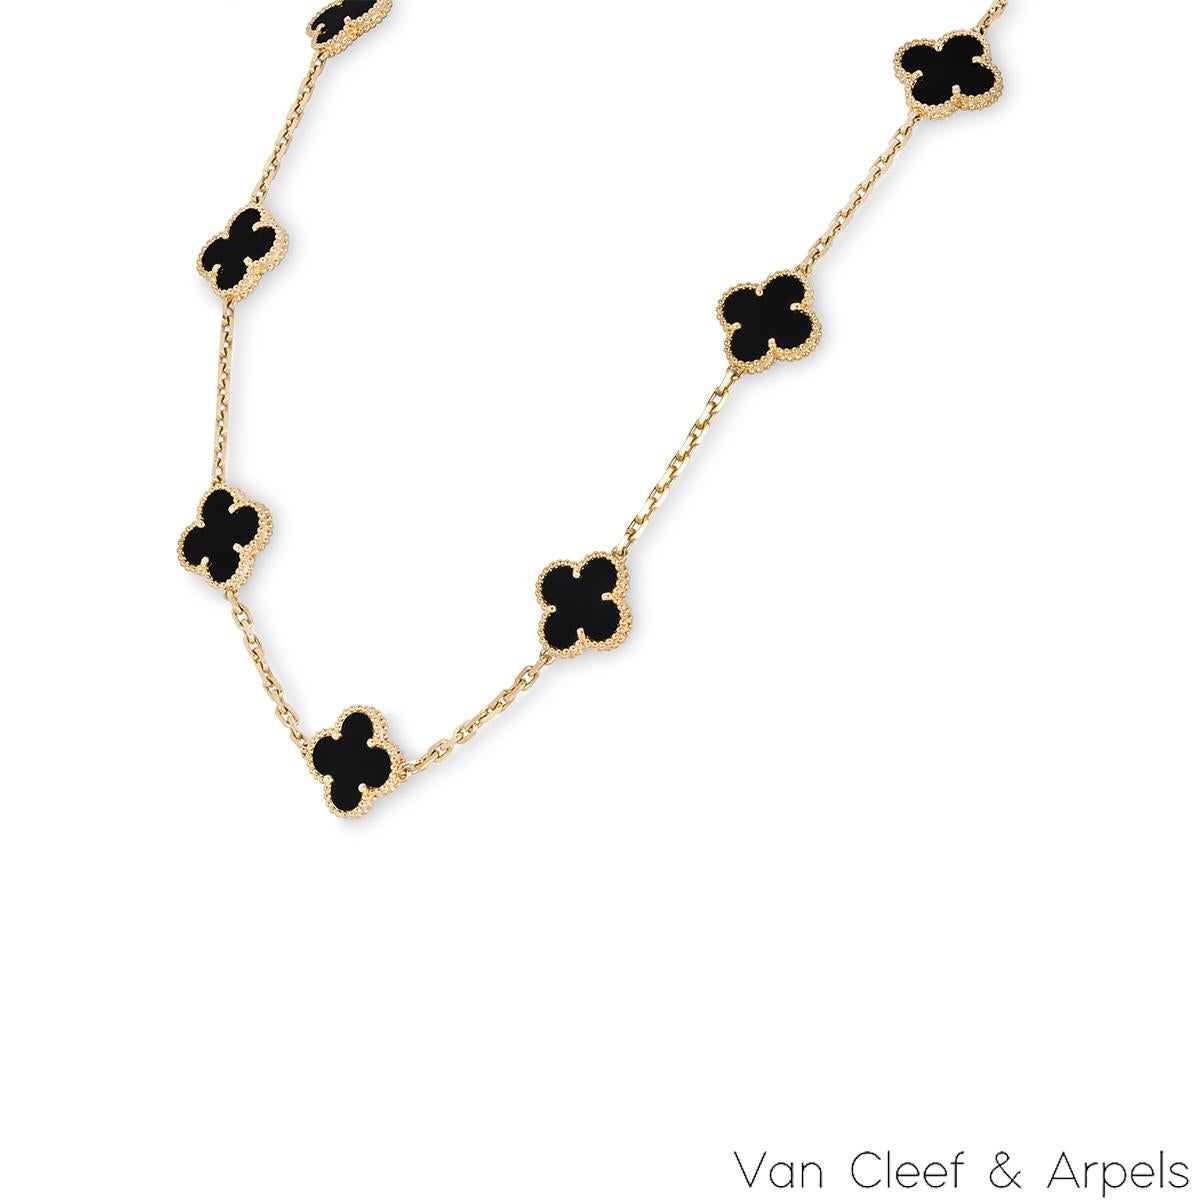 An iconic 18k yellow gold and onyx Van Cleef and Arpels necklace from the Vintage Alhambra collection. The necklace comprises of 10 iconic 4 leaf clover motifs, each set with a beaded edge and an onyx inlay. Measuring 16.5 inches in length, the